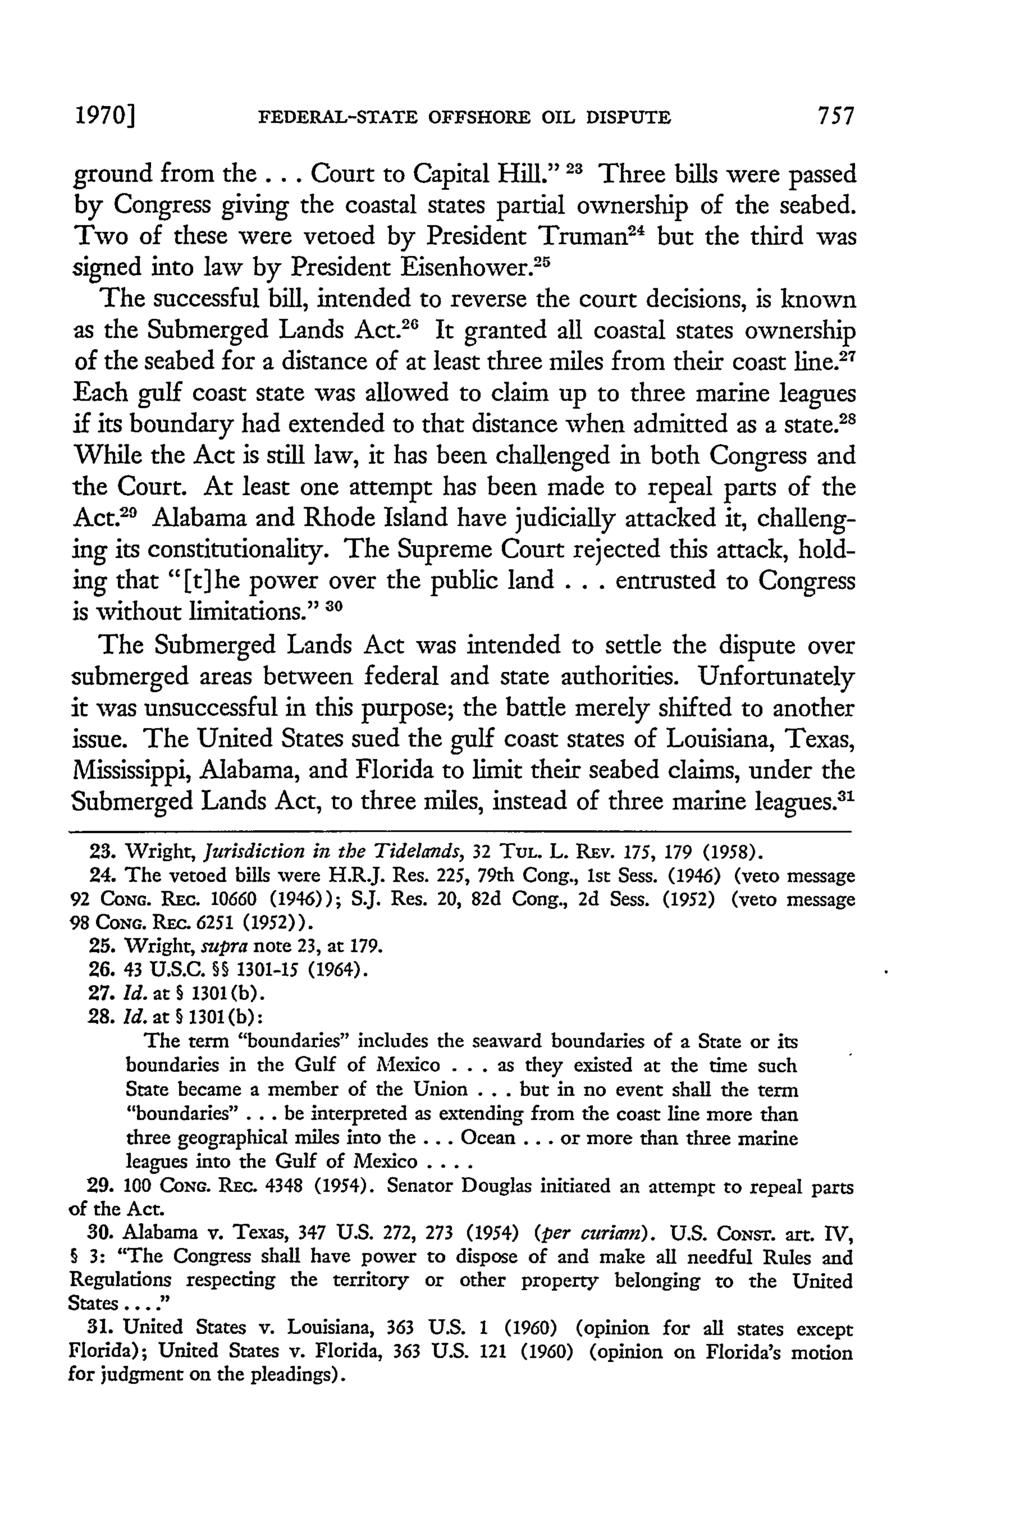 19701 FEDERAL-STATE OFFSHORE OIL DISPUTE ground from the... Court to Capital Hill." 23 Three bills were passed by Congress giving the coastal states partial ownership of the seabed.